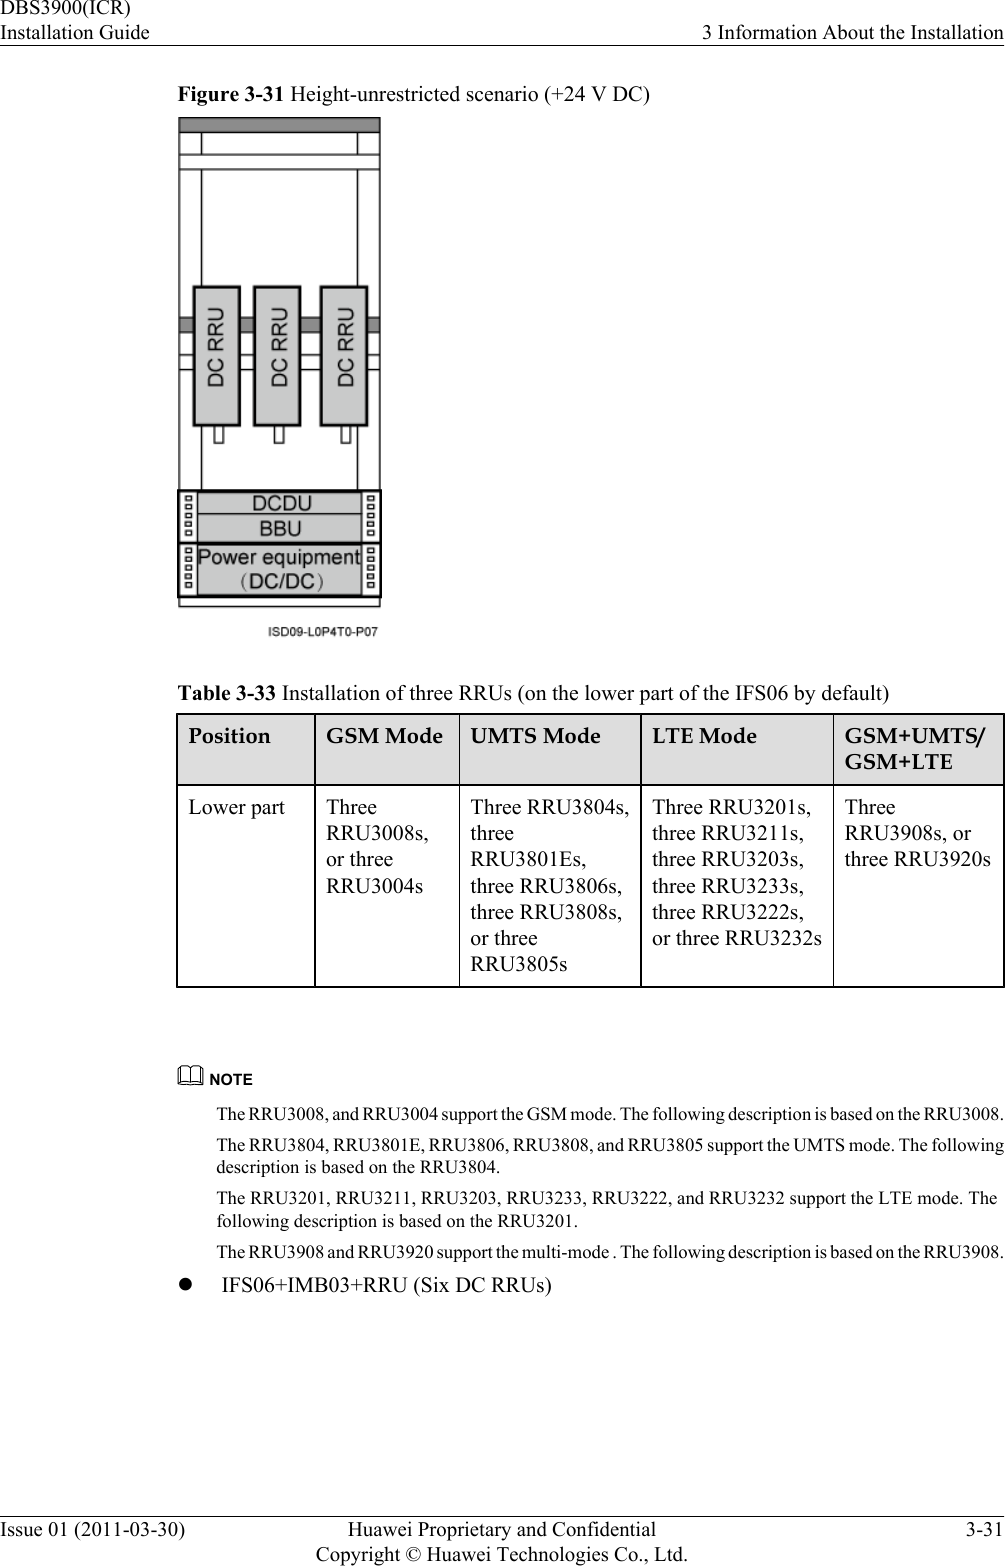 Figure 3-31 Height-unrestricted scenario (+24 V DC)Table 3-33 Installation of three RRUs (on the lower part of the IFS06 by default)Position GSM Mode UMTS Mode LTE Mode GSM+UMTS/GSM+LTELower part ThreeRRU3008s,or threeRRU3004sThree RRU3804s,threeRRU3801Es,three RRU3806s,three RRU3808s,or threeRRU3805sThree RRU3201s,three RRU3211s,three RRU3203s,three RRU3233s,three RRU3222s,or three RRU3232sThreeRRU3908s, orthree RRU3920s NOTEThe RRU3008, and RRU3004 support the GSM mode. The following description is based on the RRU3008.The RRU3804, RRU3801E, RRU3806, RRU3808, and RRU3805 support the UMTS mode. The followingdescription is based on the RRU3804.The RRU3201, RRU3211, RRU3203, RRU3233, RRU3222, and RRU3232 support the LTE mode. Thefollowing description is based on the RRU3201.The RRU3908 and RRU3920 support the multi-mode . The following description is based on the RRU3908.lIFS06+IMB03+RRU (Six DC RRUs)DBS3900(ICR)Installation Guide 3 Information About the InstallationIssue 01 (2011-03-30) Huawei Proprietary and ConfidentialCopyright © Huawei Technologies Co., Ltd.3-31